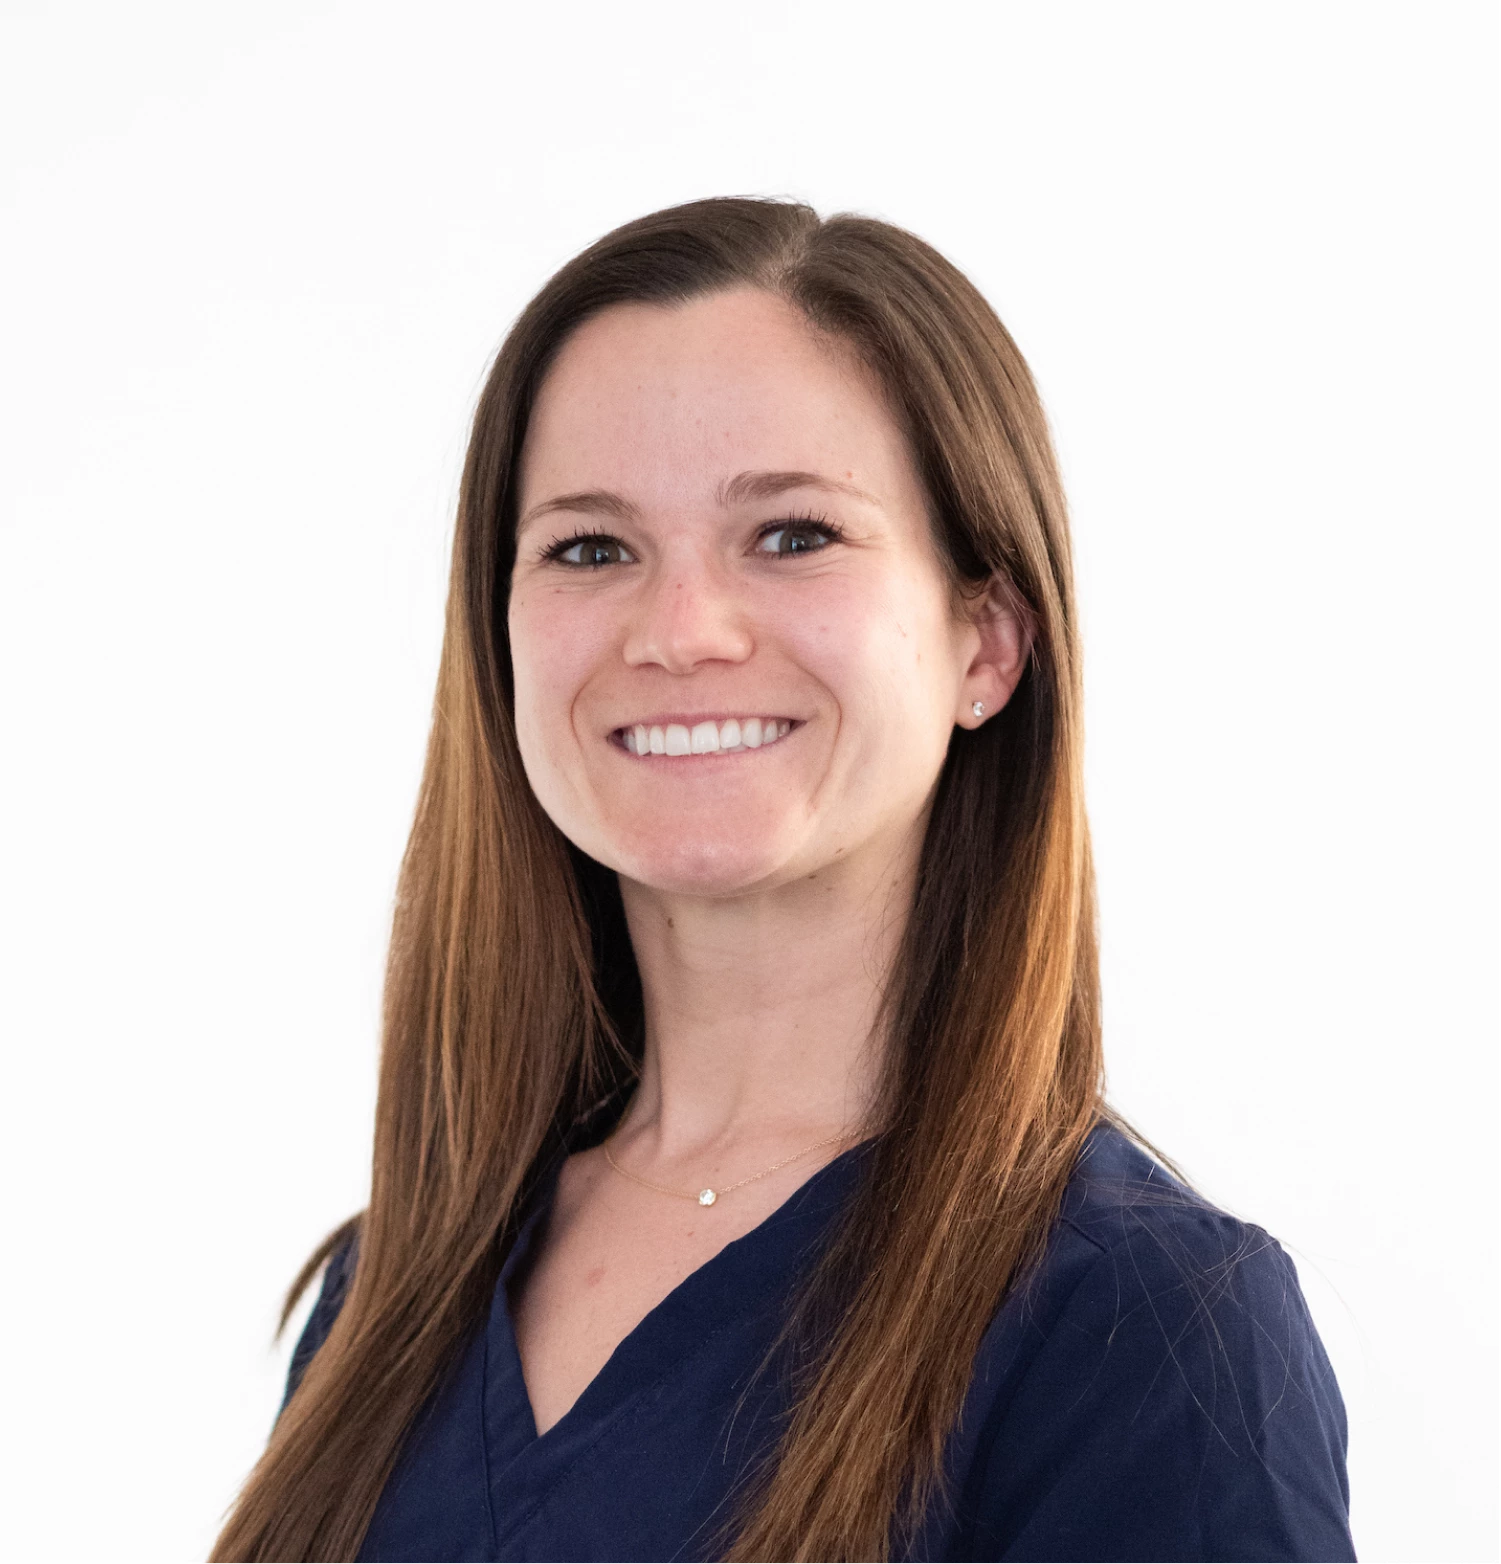 Dr. Amanda Carew, DDS is originally from Pelham, NY. She received her undergraduate degree in Chemistry from the University of North Carolina at Chapel Hill. Dr. Carew received her dental degree from New York University.